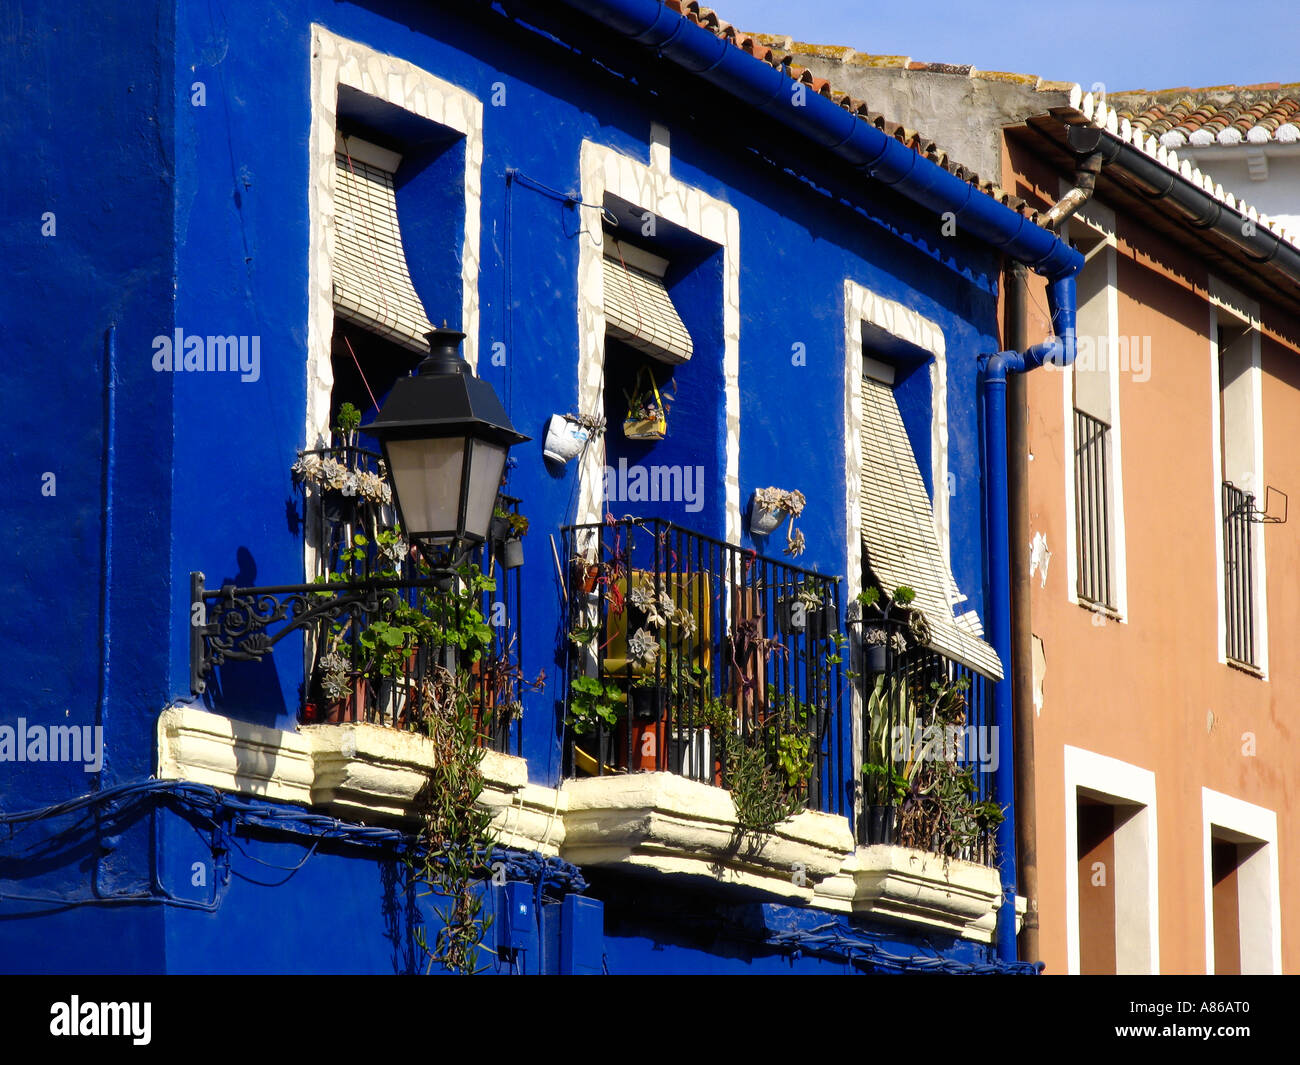 Villagestreet with striking blue house in Spain Stock Photo